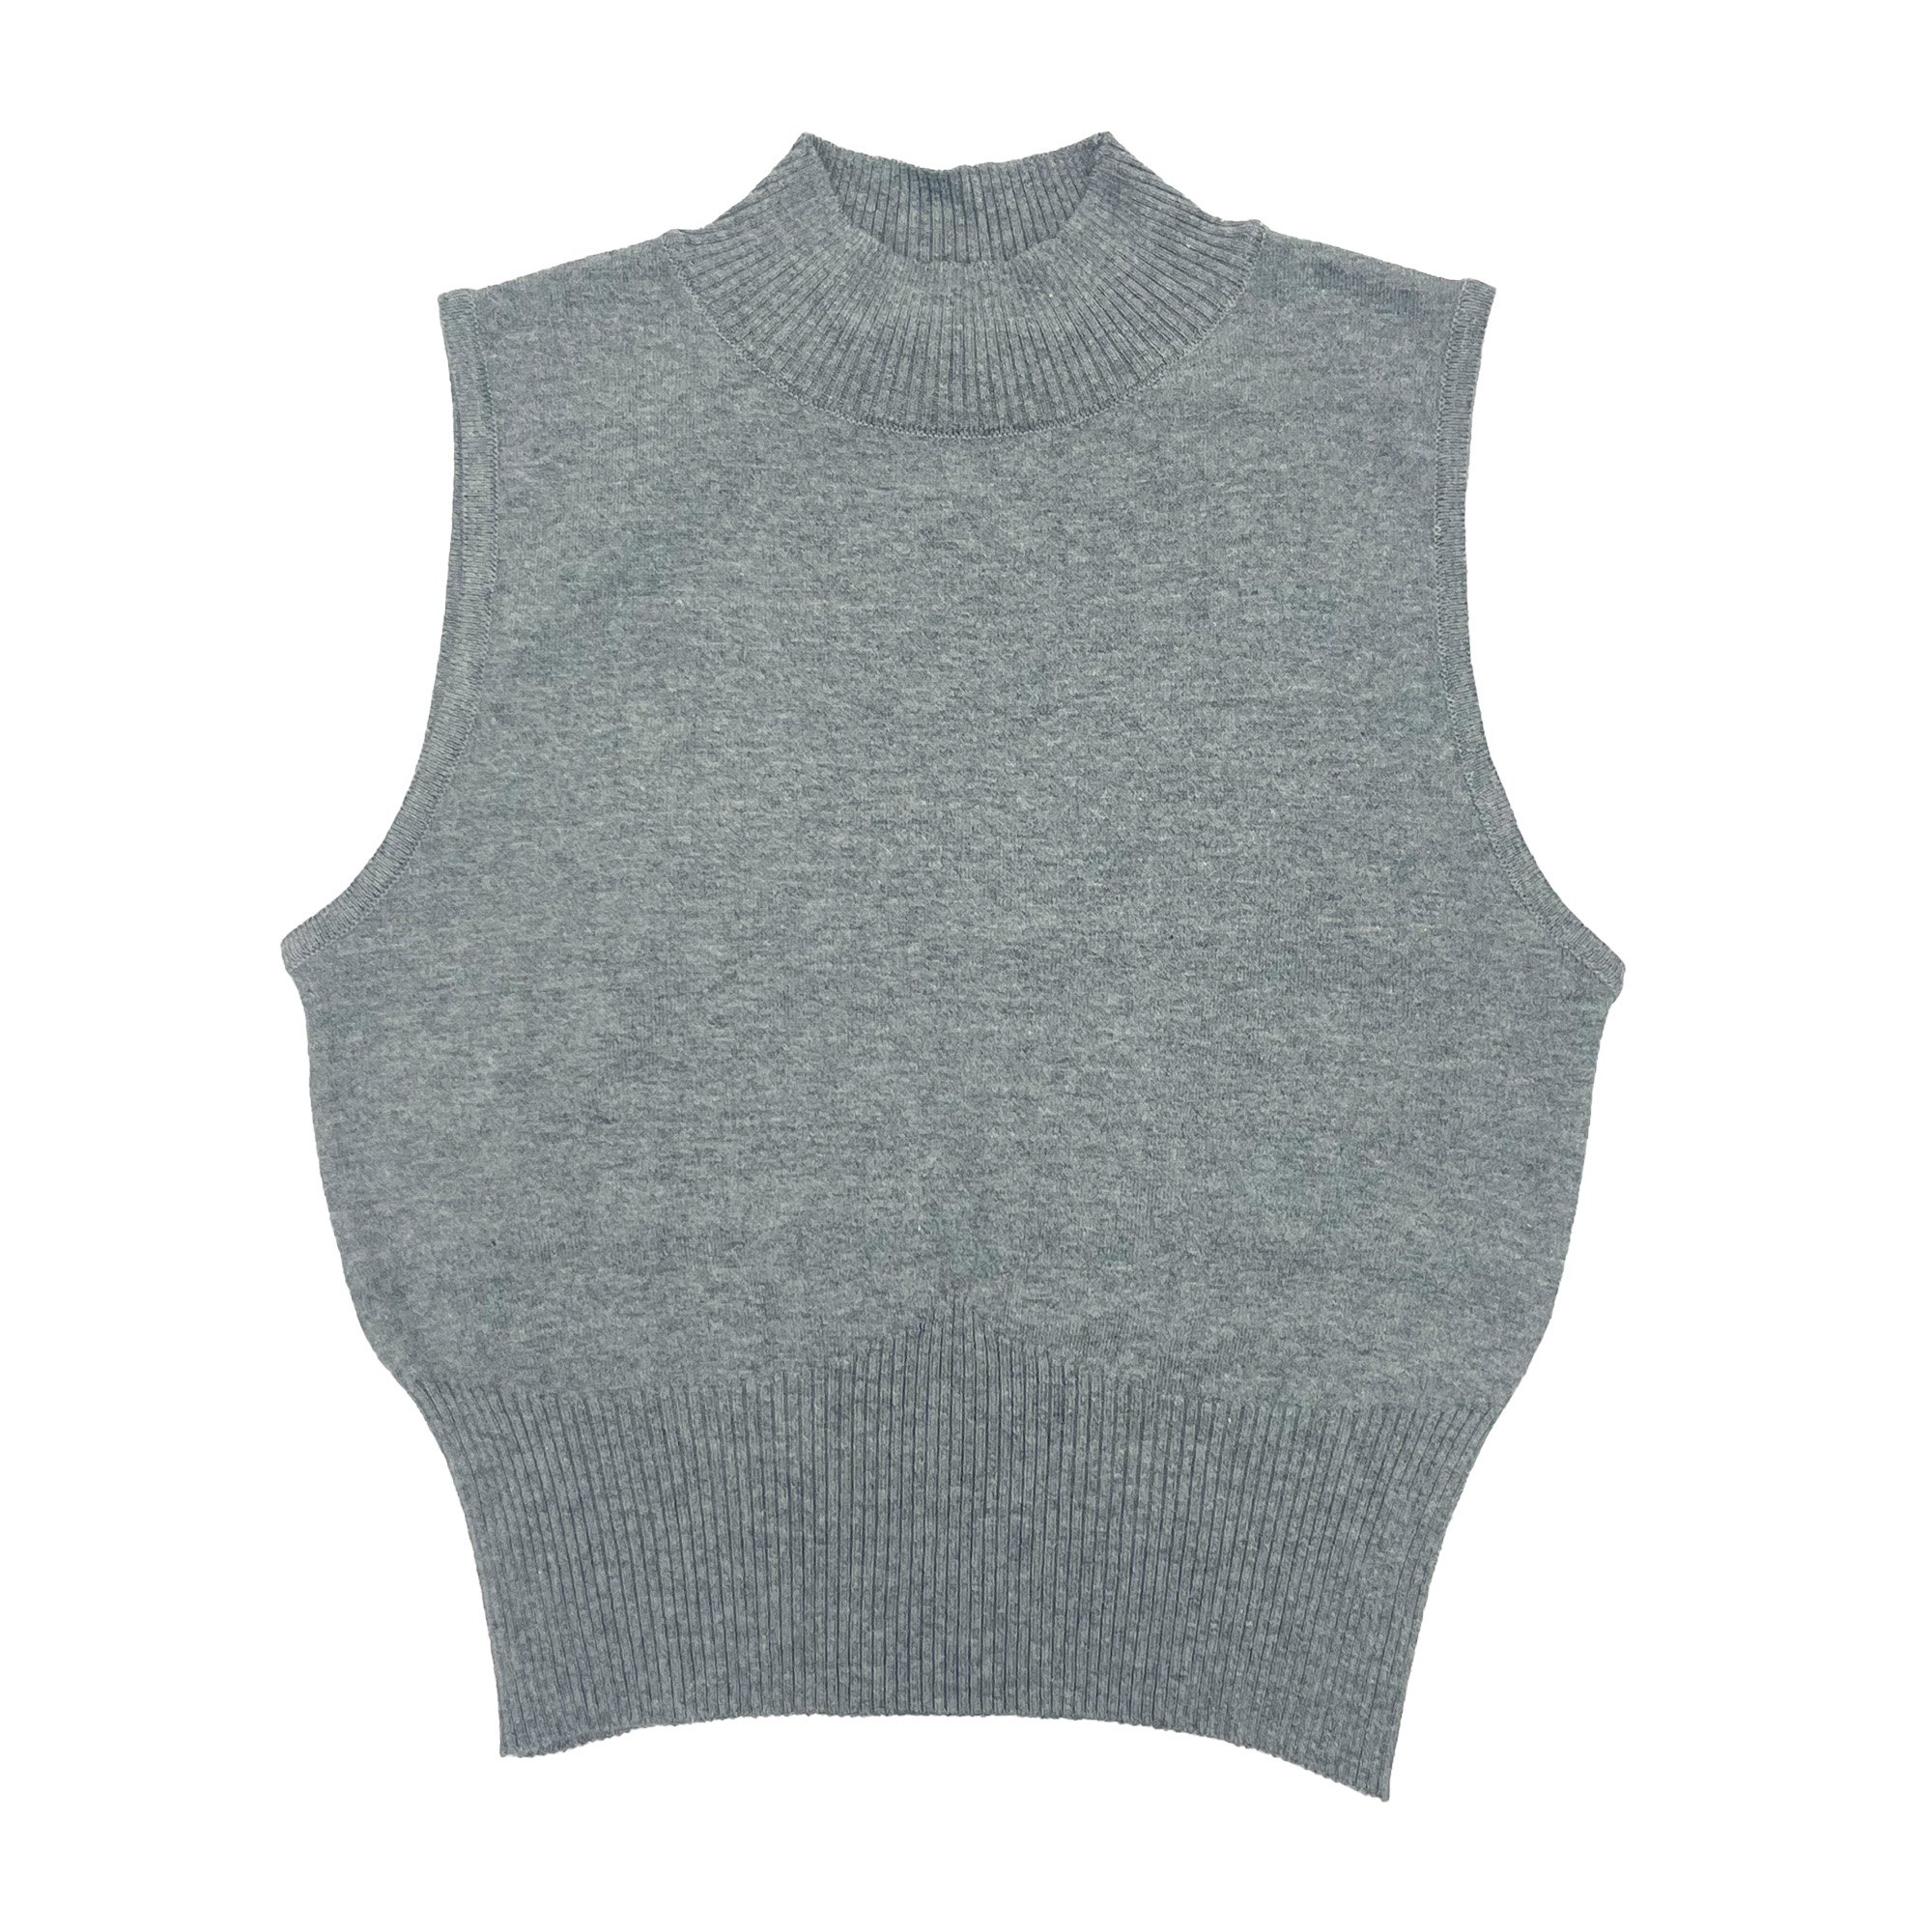 <img class='new_mark_img1' src='https://img.shop-pro.jp/img/new/icons7.gif' style='border:none;display:inline;margin:0px;padding:0px;width:auto;' />f's6 original Mini cotton knit / GRAY